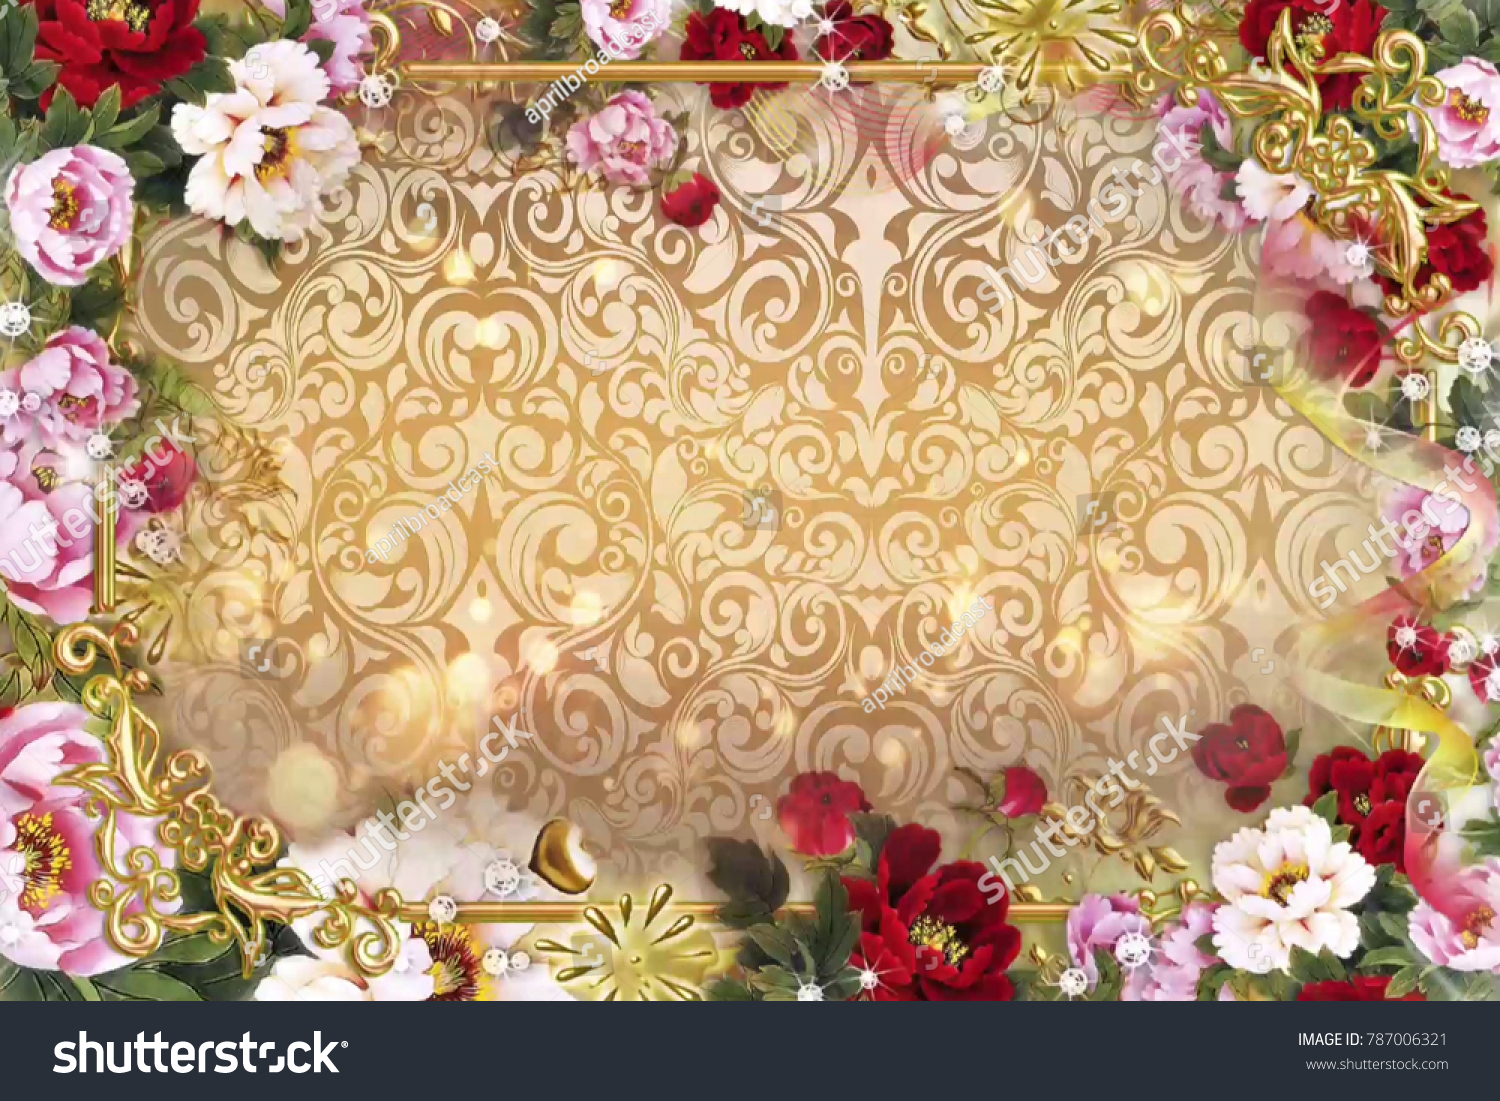 528 Background hd wedding Stock Photos, Images & Photography | Shutterstock